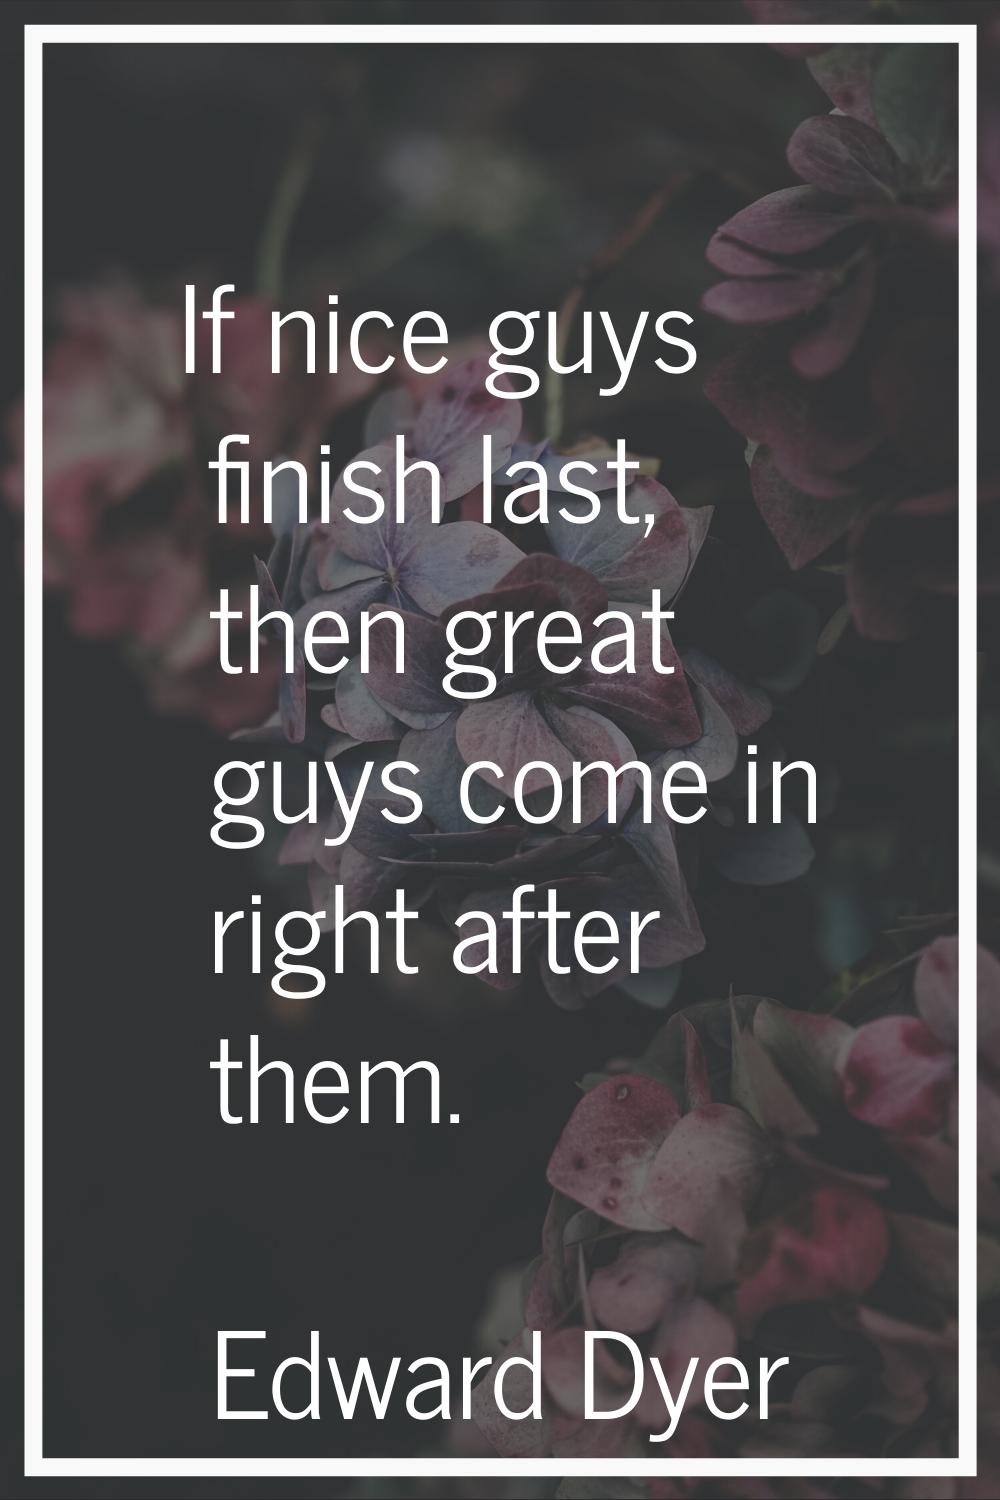 If nice guys finish last, then great guys come in right after them.